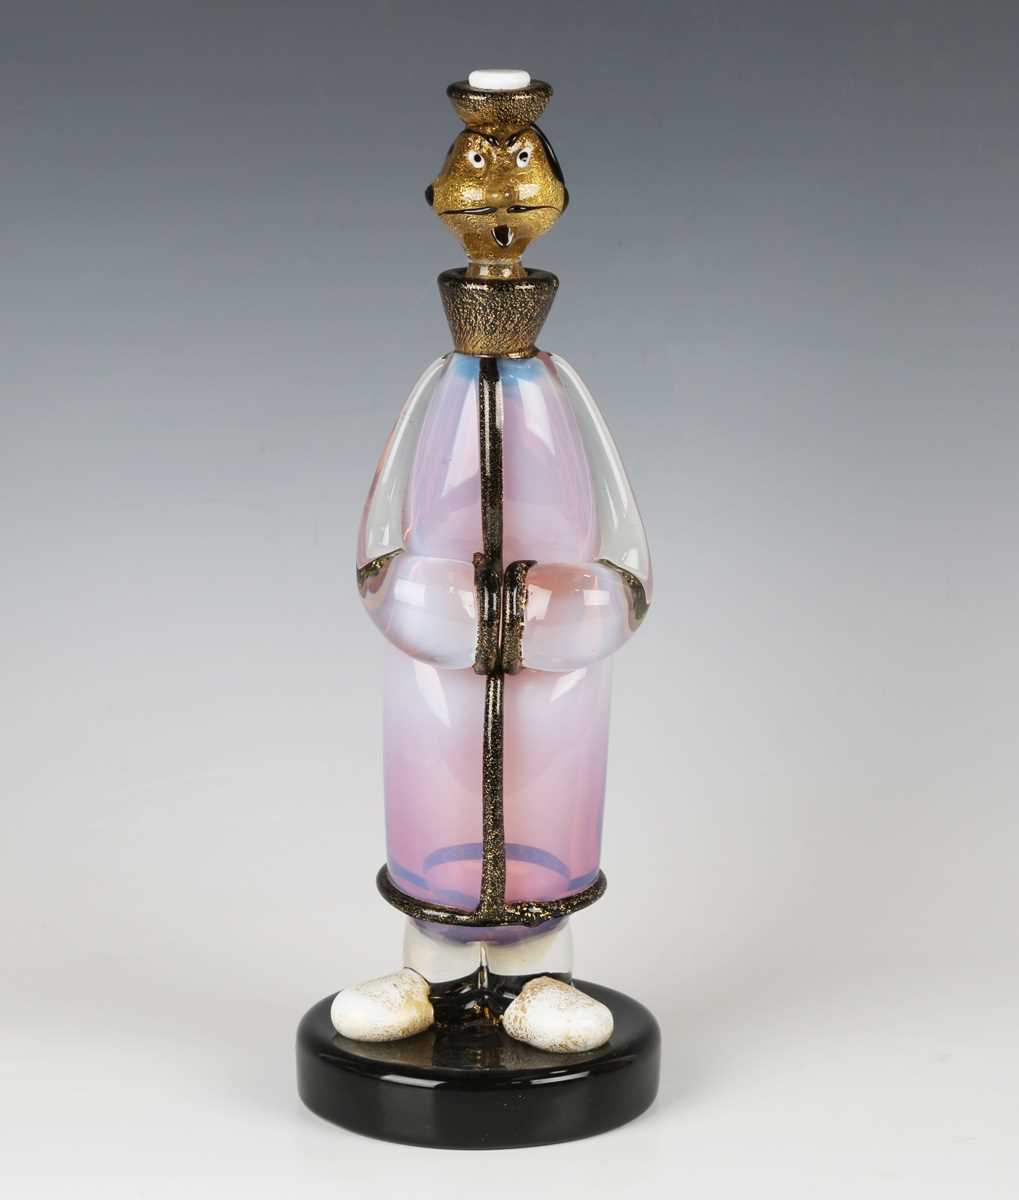 A Murano glass figural decanter bottle and stopper, mid 20th century, in the form of a standing